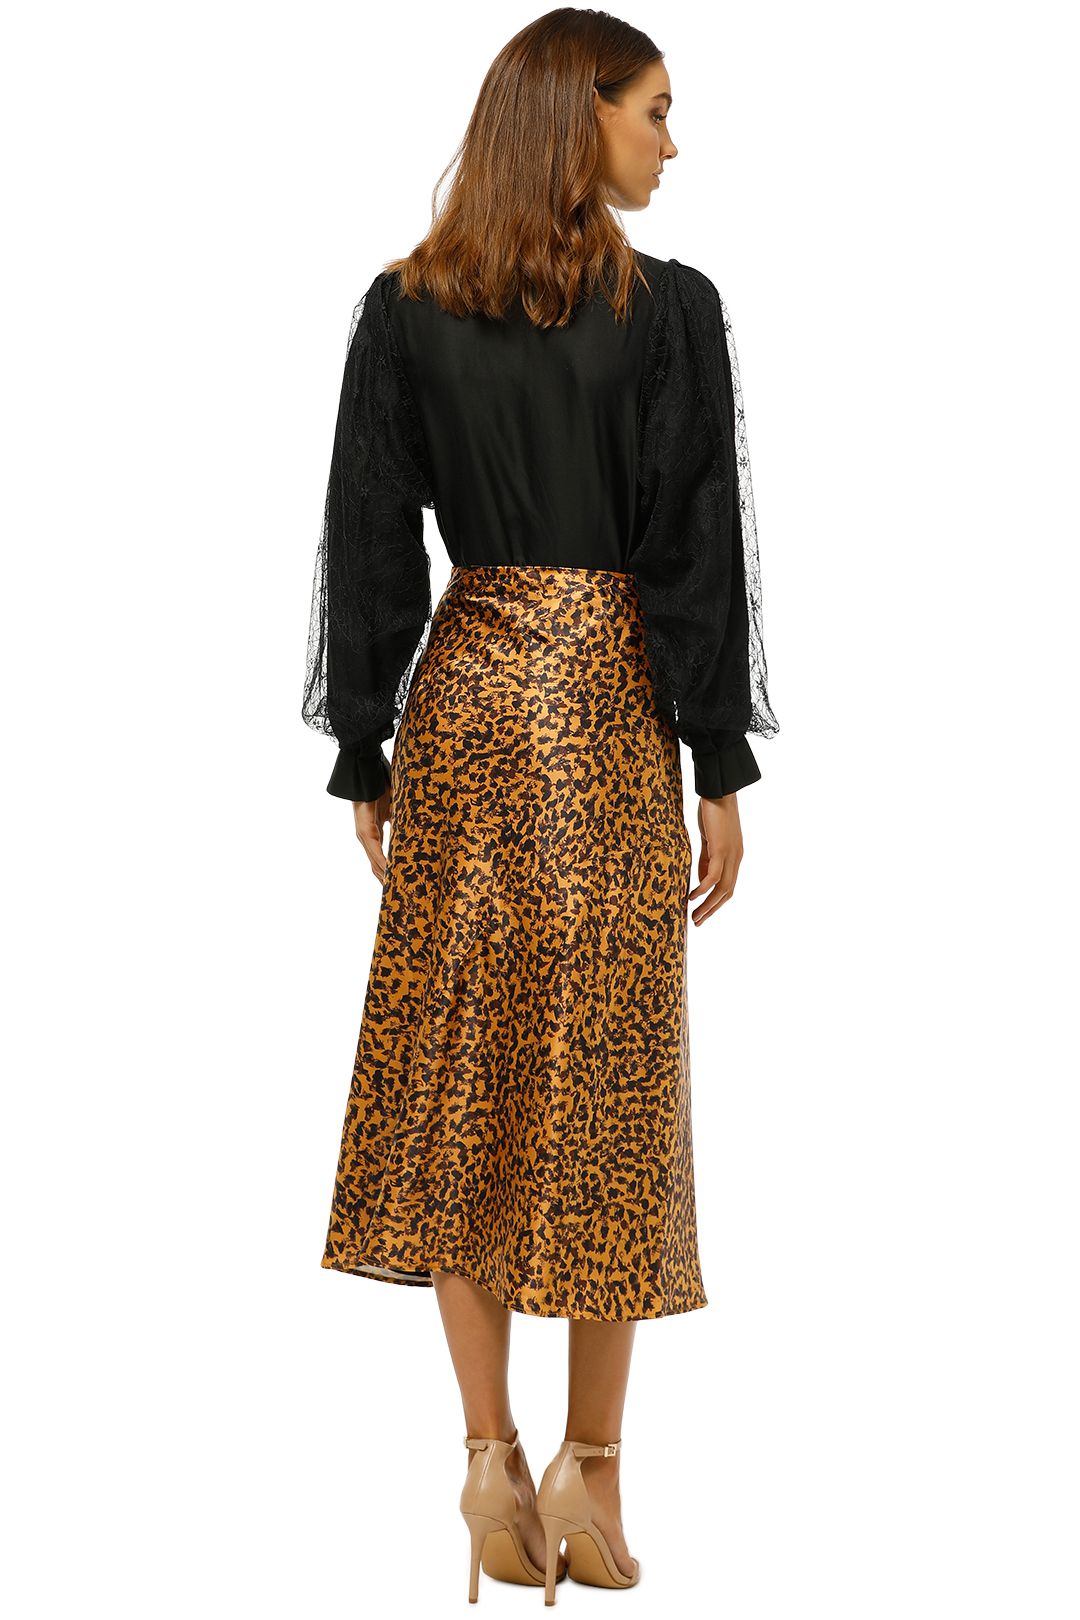 C/MEO-Collective-Polarised-Skirt-Mustard-Painted-Spot-Back